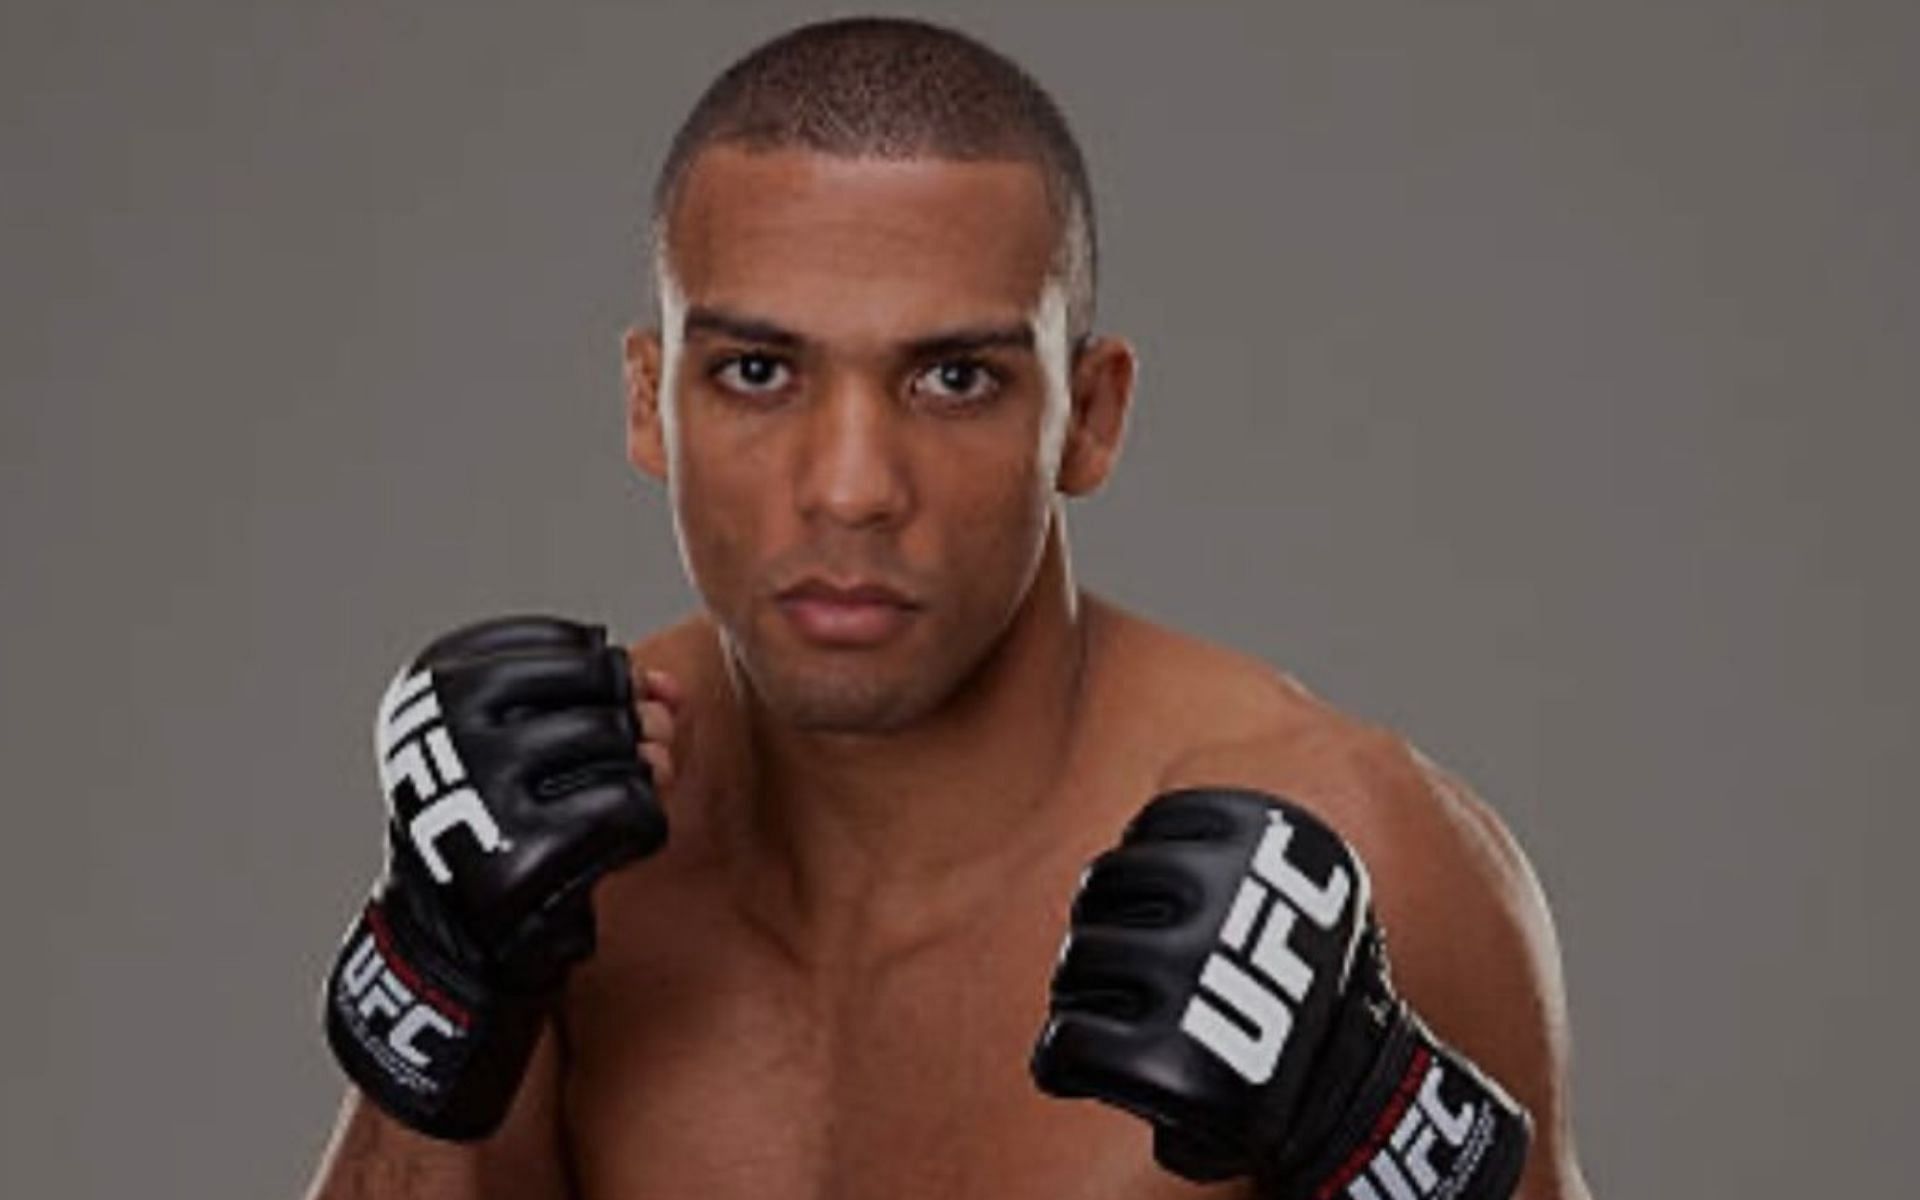 Edson Barboza wants to fight for the BMF title [Image via: @edsonbarbozajr on Instagram]